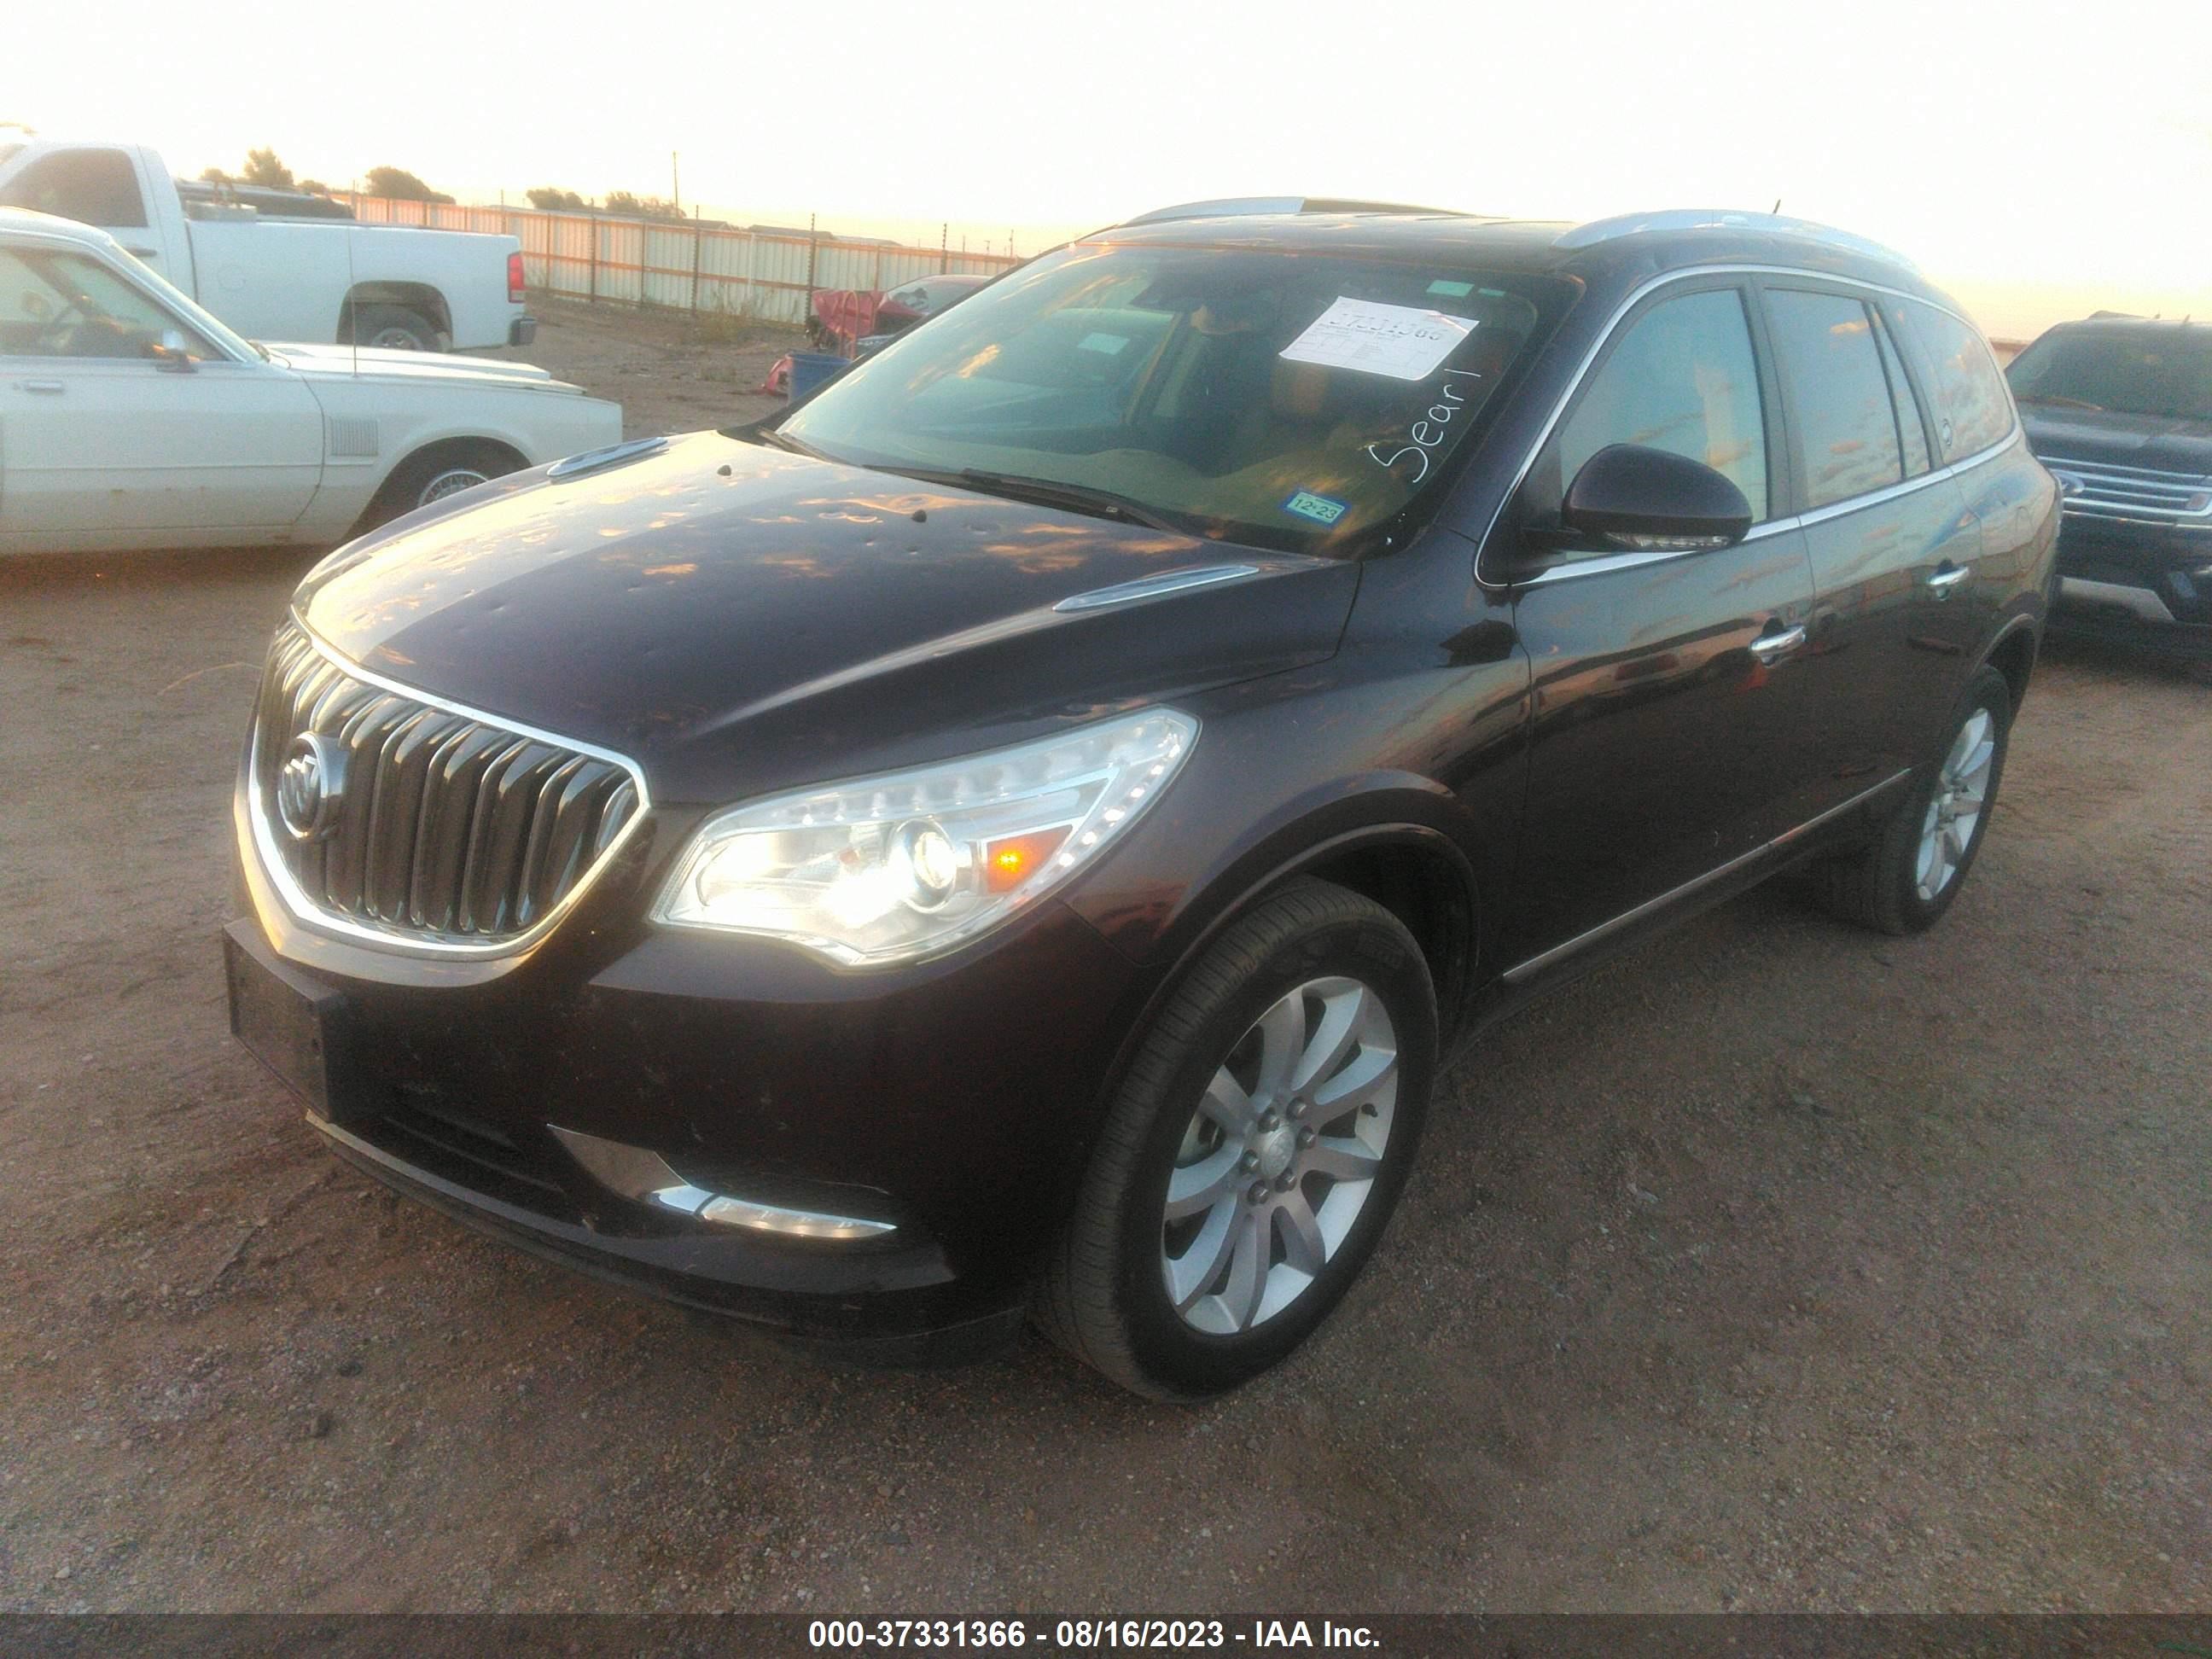 5GAKRCKDXHJ328405  - BUICK ENCLAVE  2017 IMG - 1